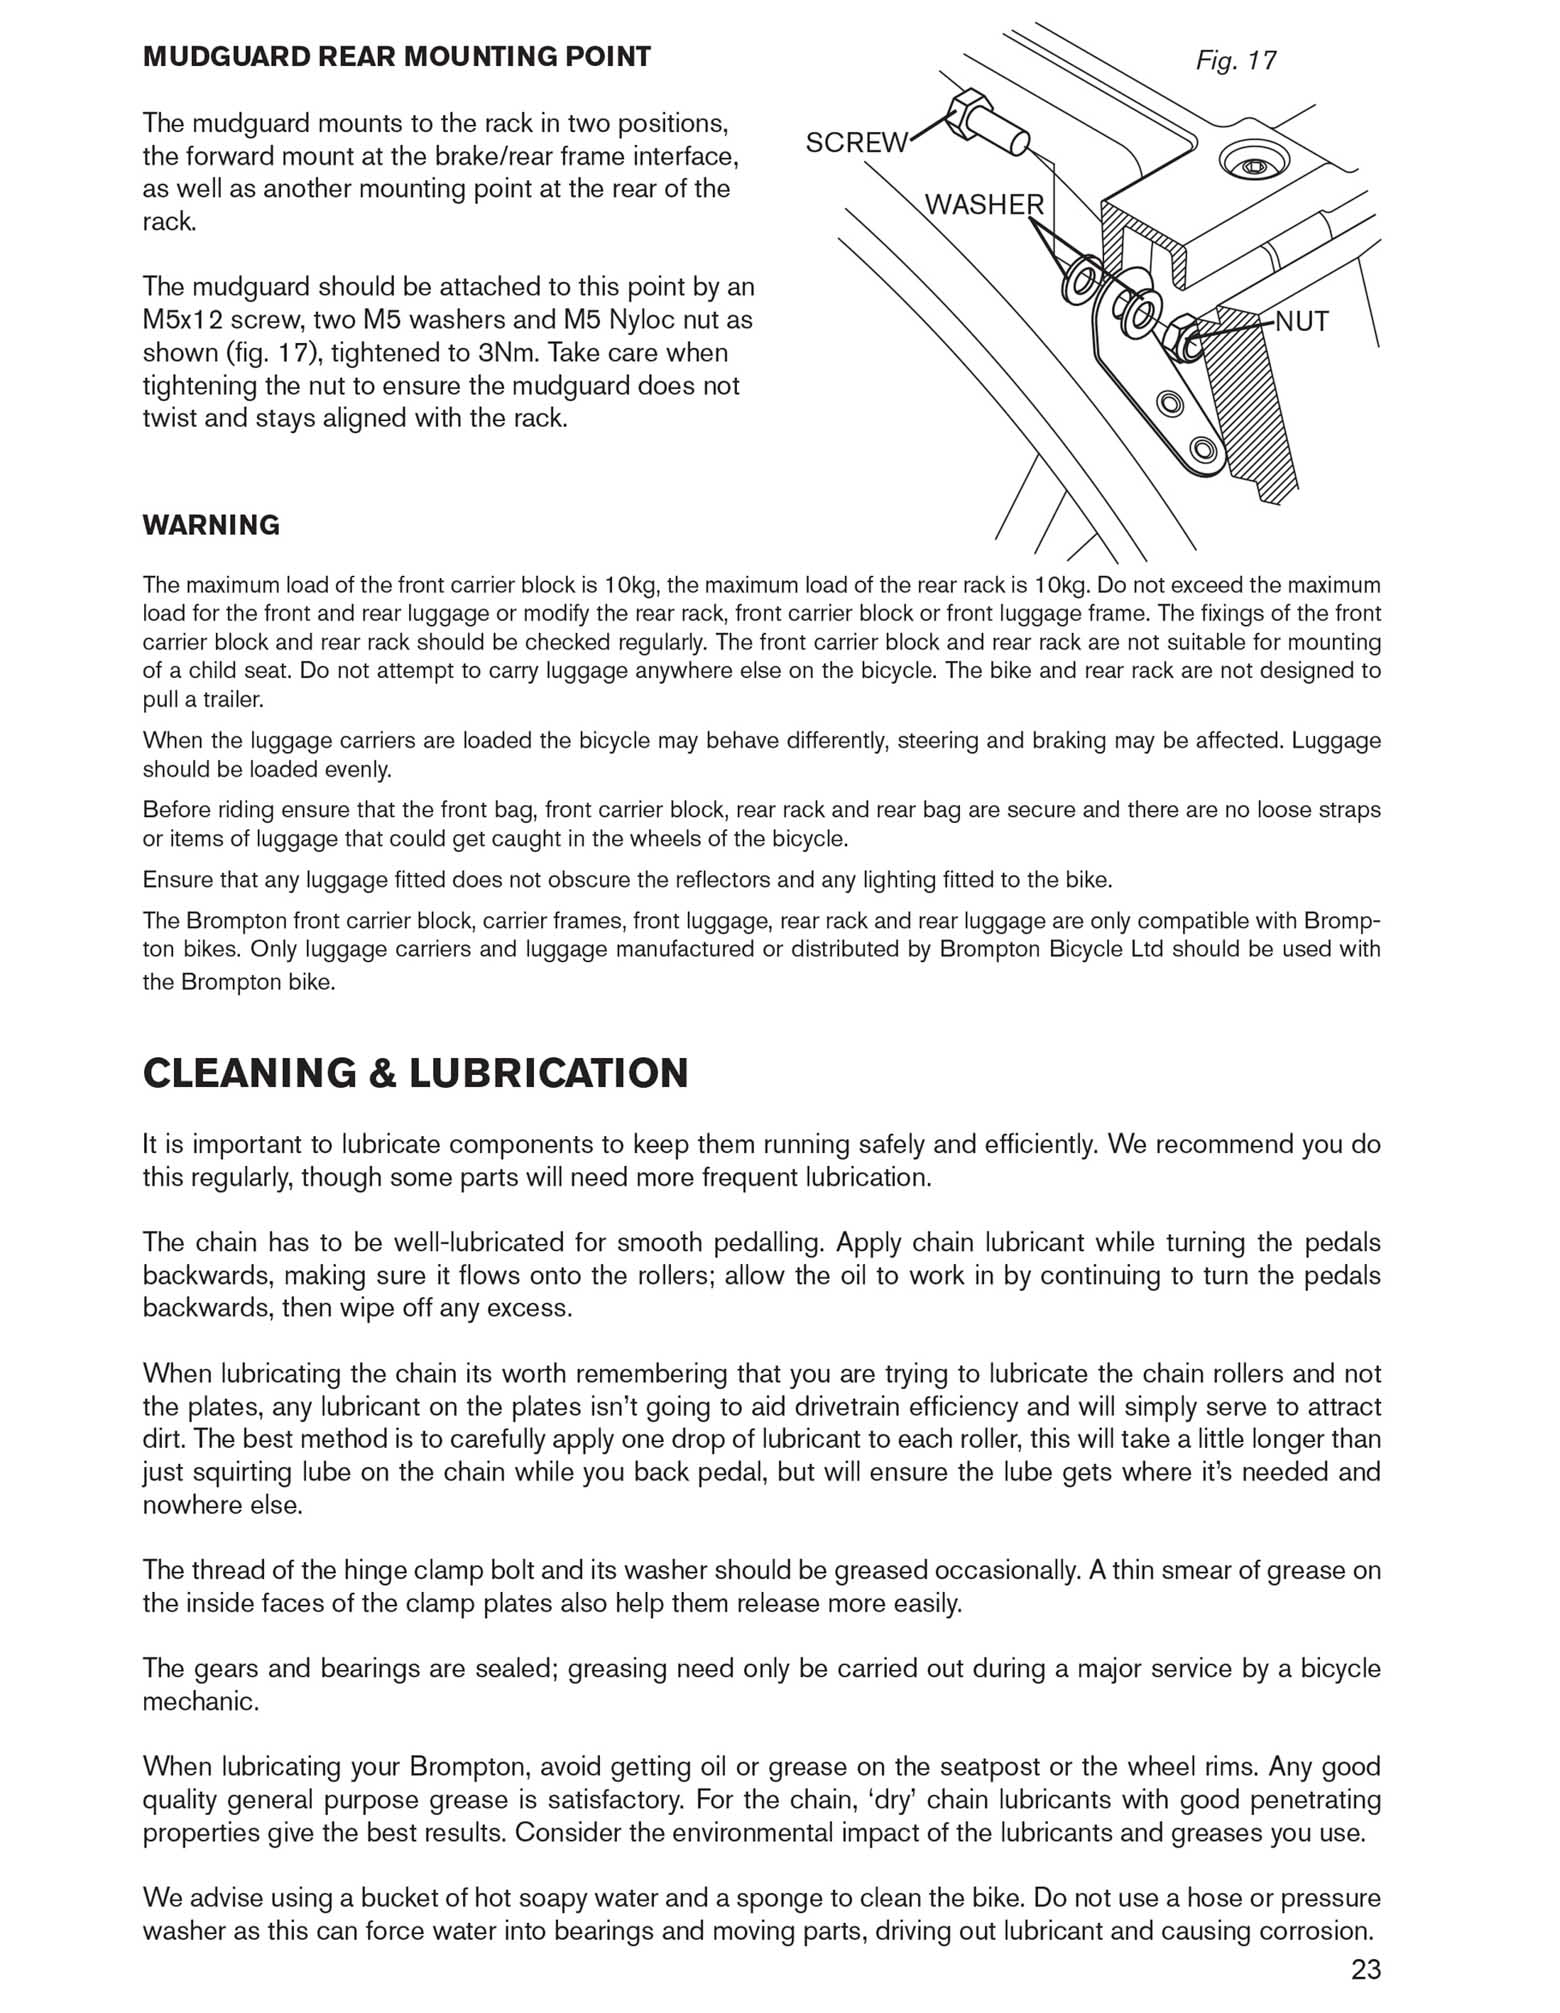 Brompton - Owners Manual 2017 page 23 main image